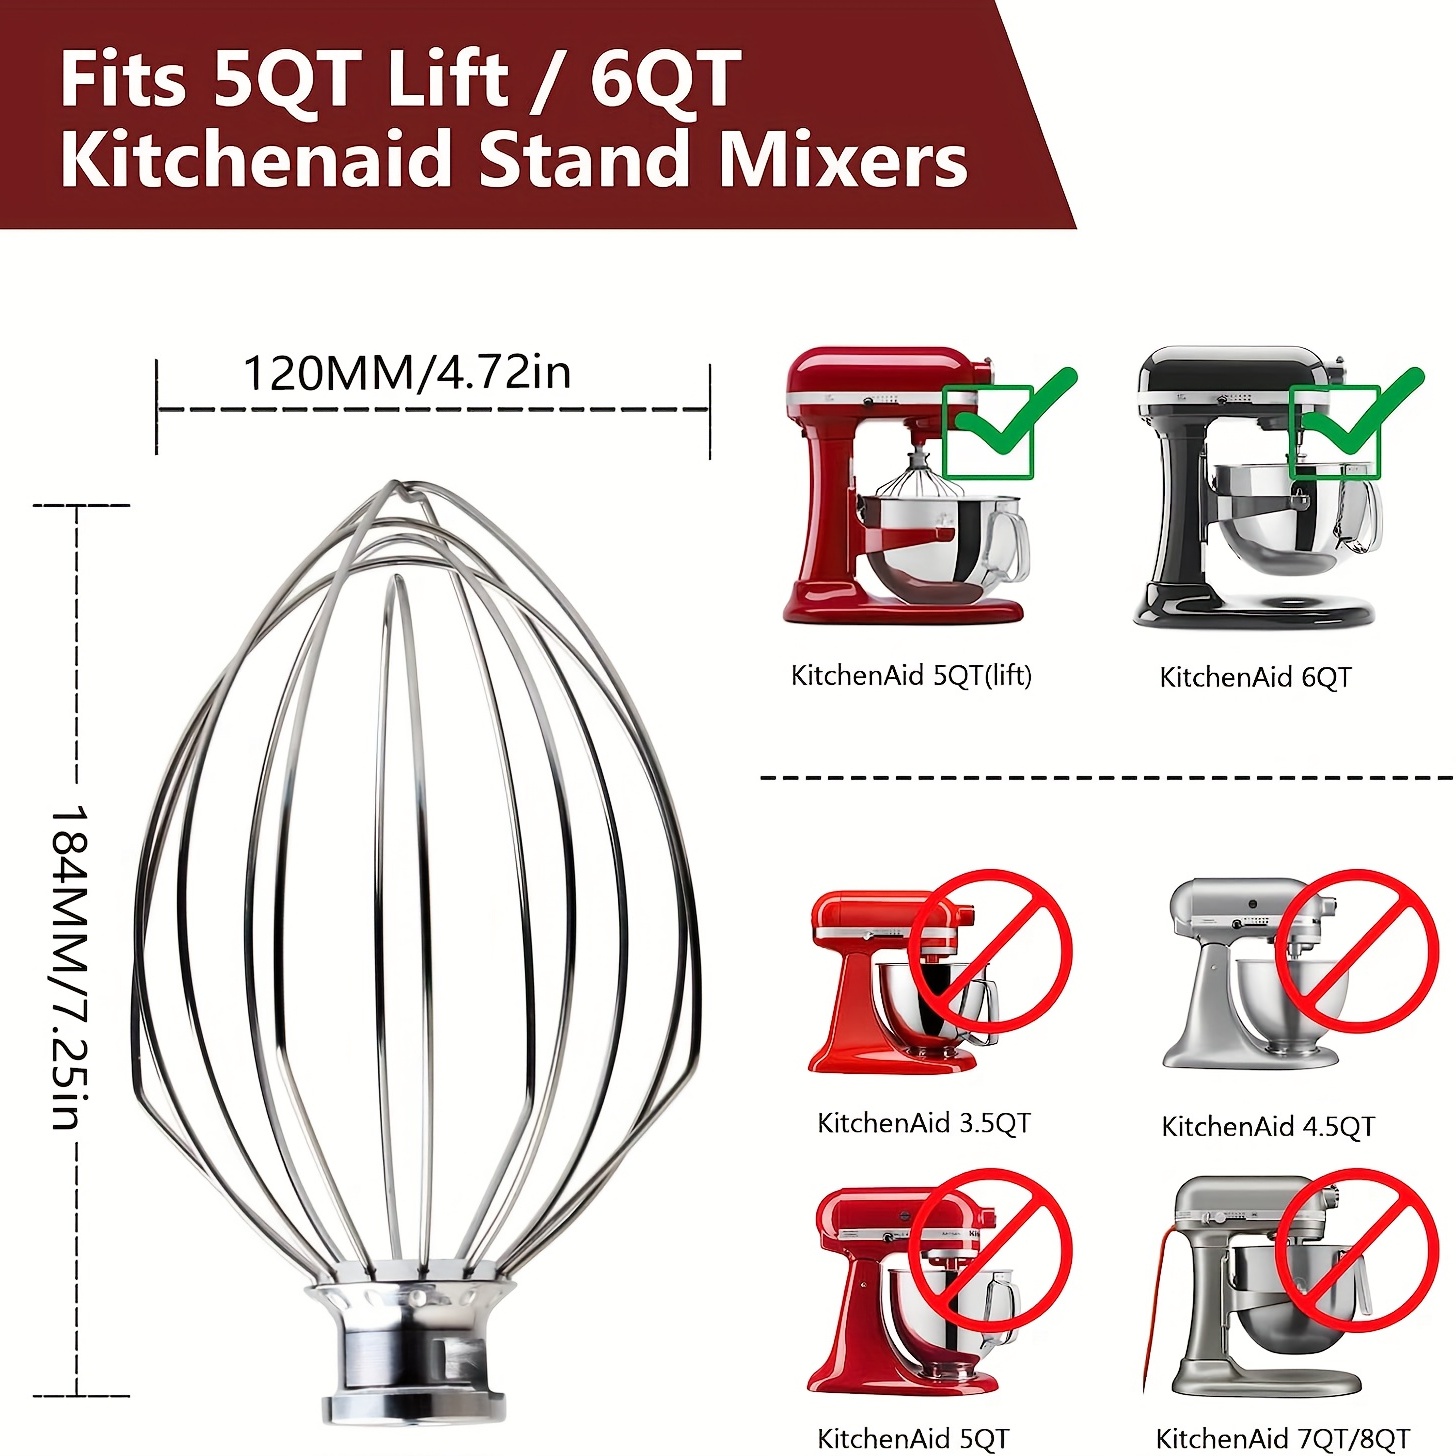 K5AWW Wire Whip Steel Wire Whisk Stainless Steel Egg Beater Mixer Mixing  Head 5QT for American